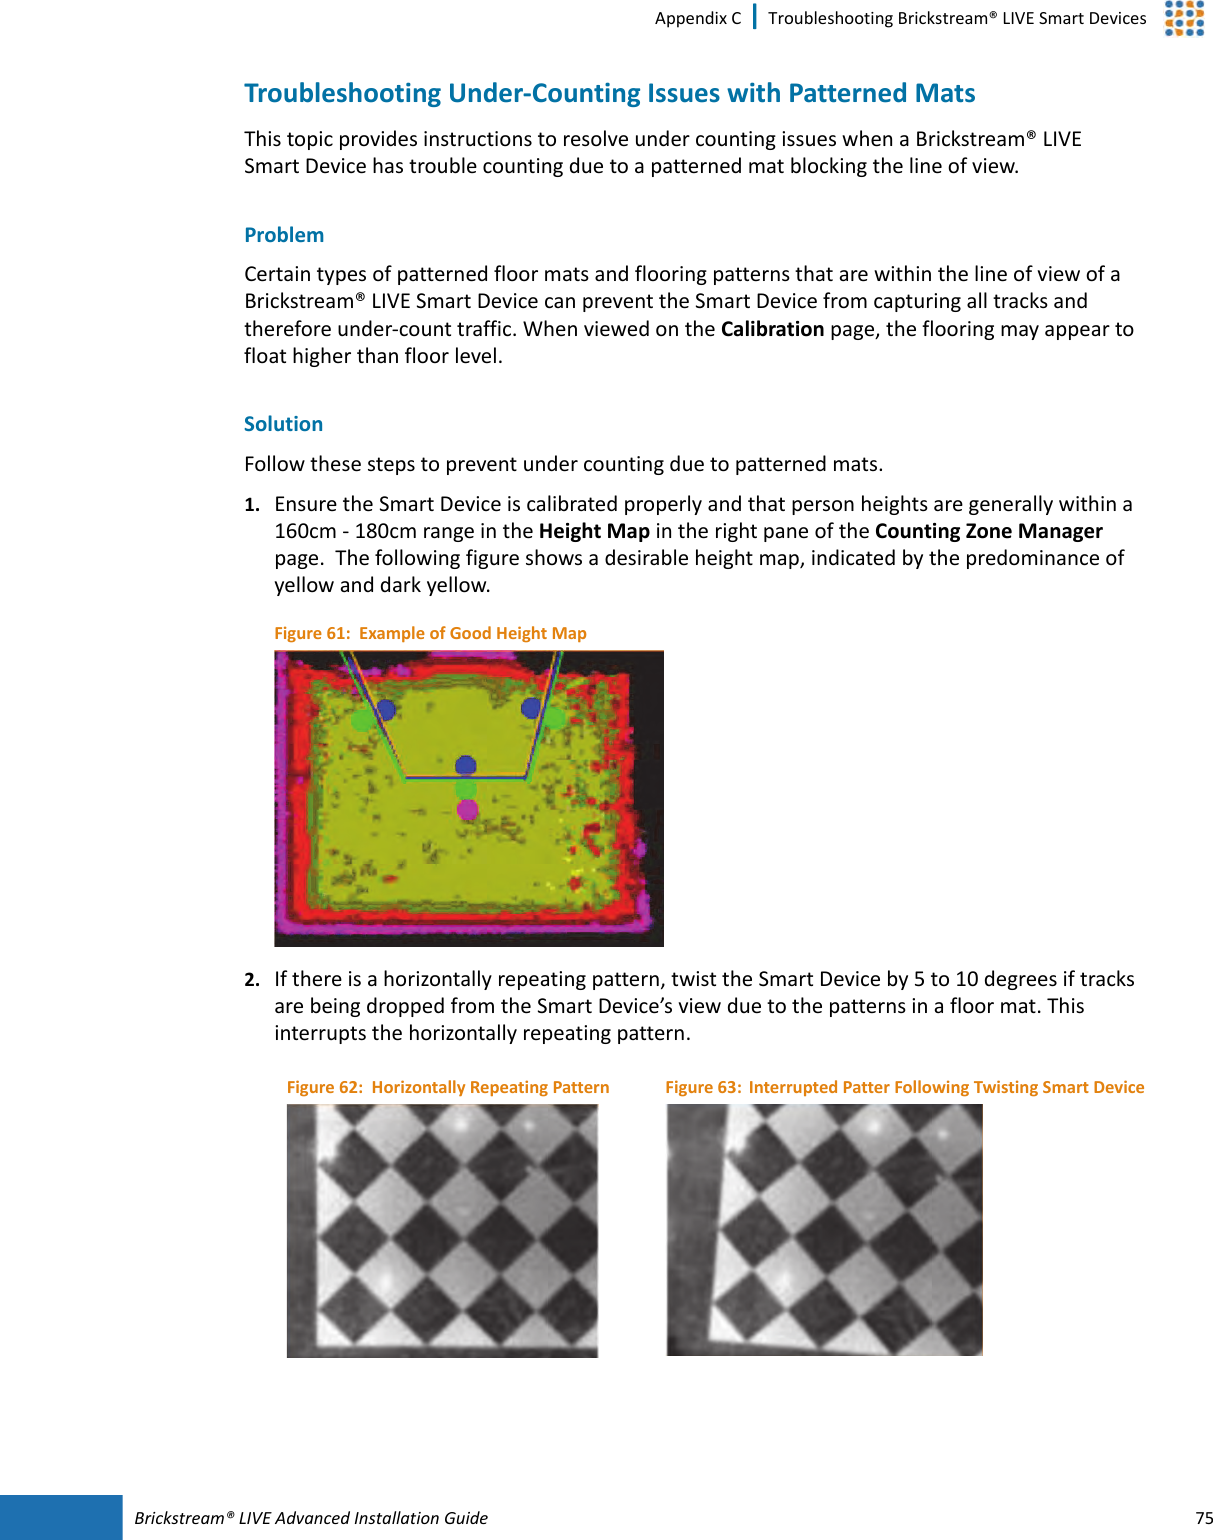 Brickstream®  LIVE Advanced Installation Guide 75Appendix C | Troubleshooting Brickstream® LIVE Smart DevicesTroubleshooting Under-Counting Issues with Patterned MatsThis topic provides instructions to resolve under counting issues when a Brickstream® LIVE Smart  Device has trouble counting due to a patterned mat blocking the line of view.ProblemCertain types of patterned floor mats and flooring patterns that are within the line of view of a Brickstream® LIVE Smart  Device can prevent the Smart  Device from capturing all tracks and therefore under-count traffic. When viewed on the Calibration page, the flooring may appear to float higher than floor level.SolutionFollow these steps to prevent under counting due to patterned mats. 1. Ensure the Smart  Device is calibrated properly and that person heights are generally within a 160cm - 180cm range in the Height Map in the right pane of the Counting Zone Manager page.  The following figure shows a desirable height map, indicated by the predominance of yellow and dark yellow.Figure 61:  Example of Good Height Map2. If there is a horizontally repeating pattern, twist the Smart  Device by 5 to 10 degrees if tracks are being dropped from the Smart  Device’s view due to the patterns in a floor mat. This interrupts the horizontally repeating pattern. Figure 62:  Horizontally Repeating Pattern Figure 63: Interrupted Patter Following Twisting Smart Device